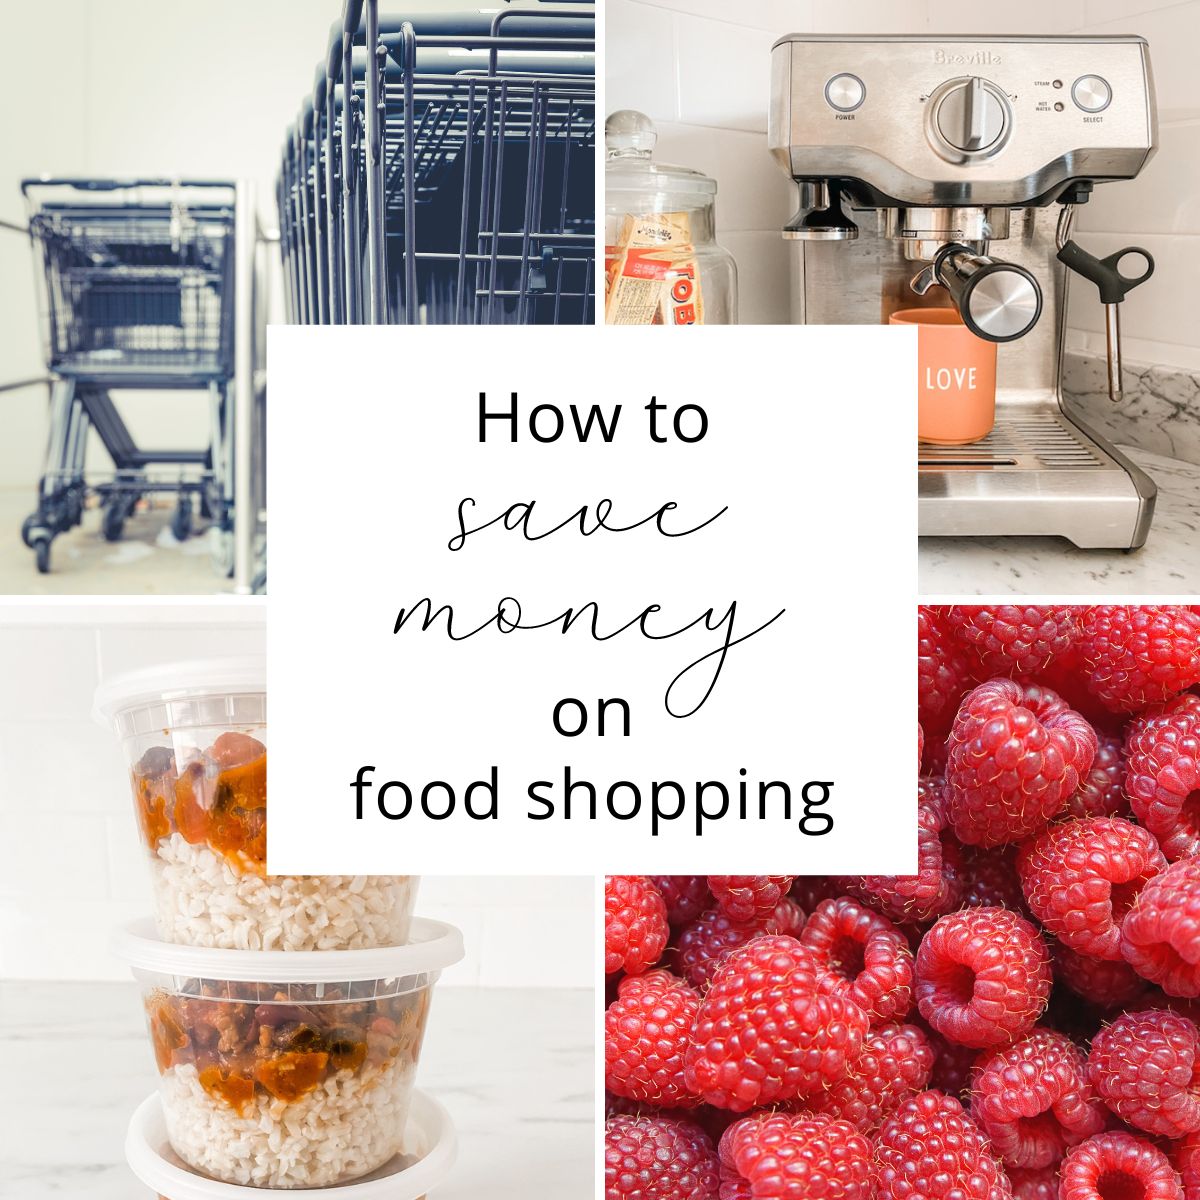 How to save money on food shopping
